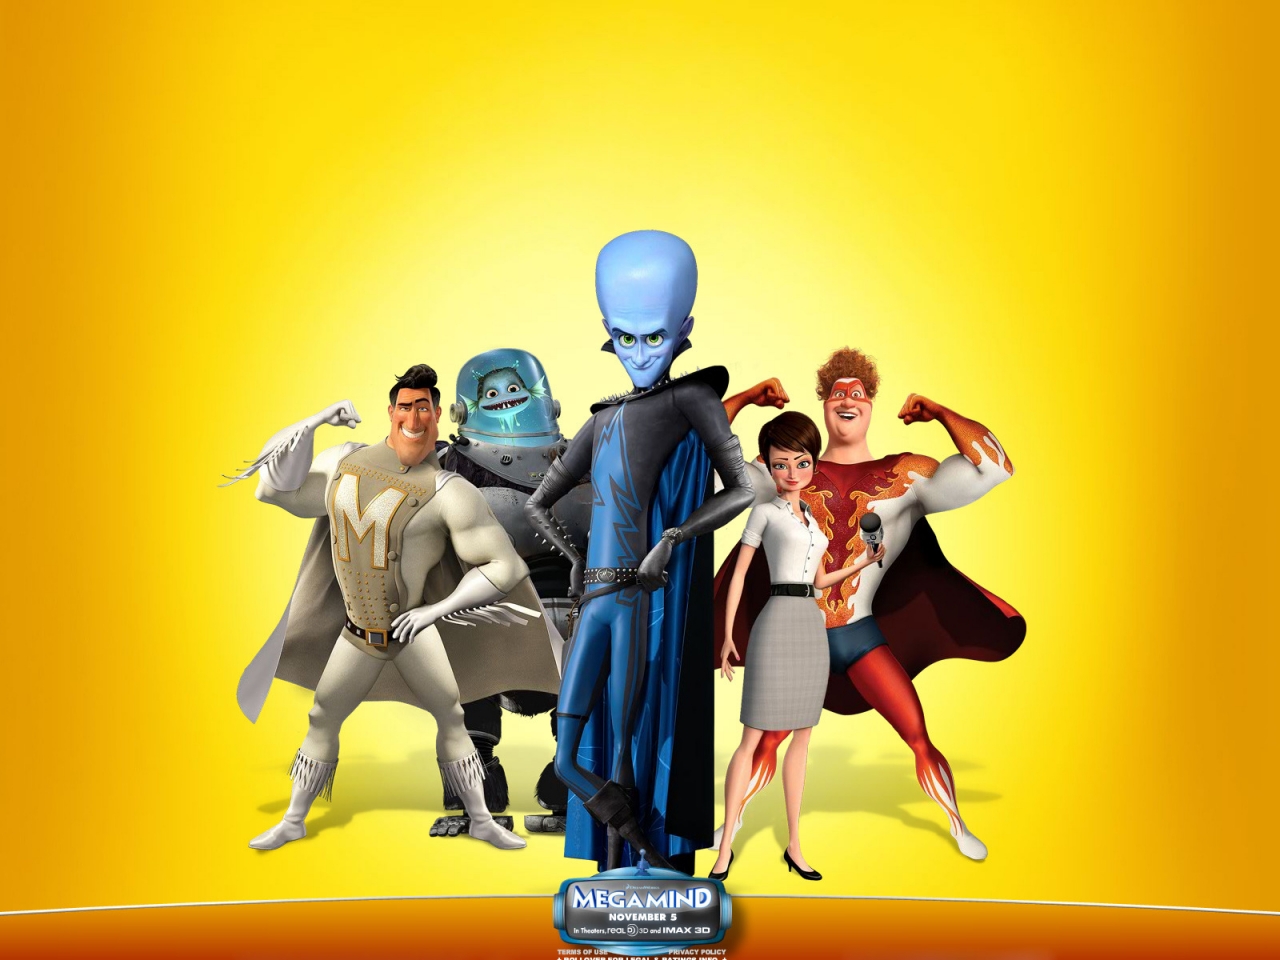 Megamind Movie for 1280 x 960 resolution